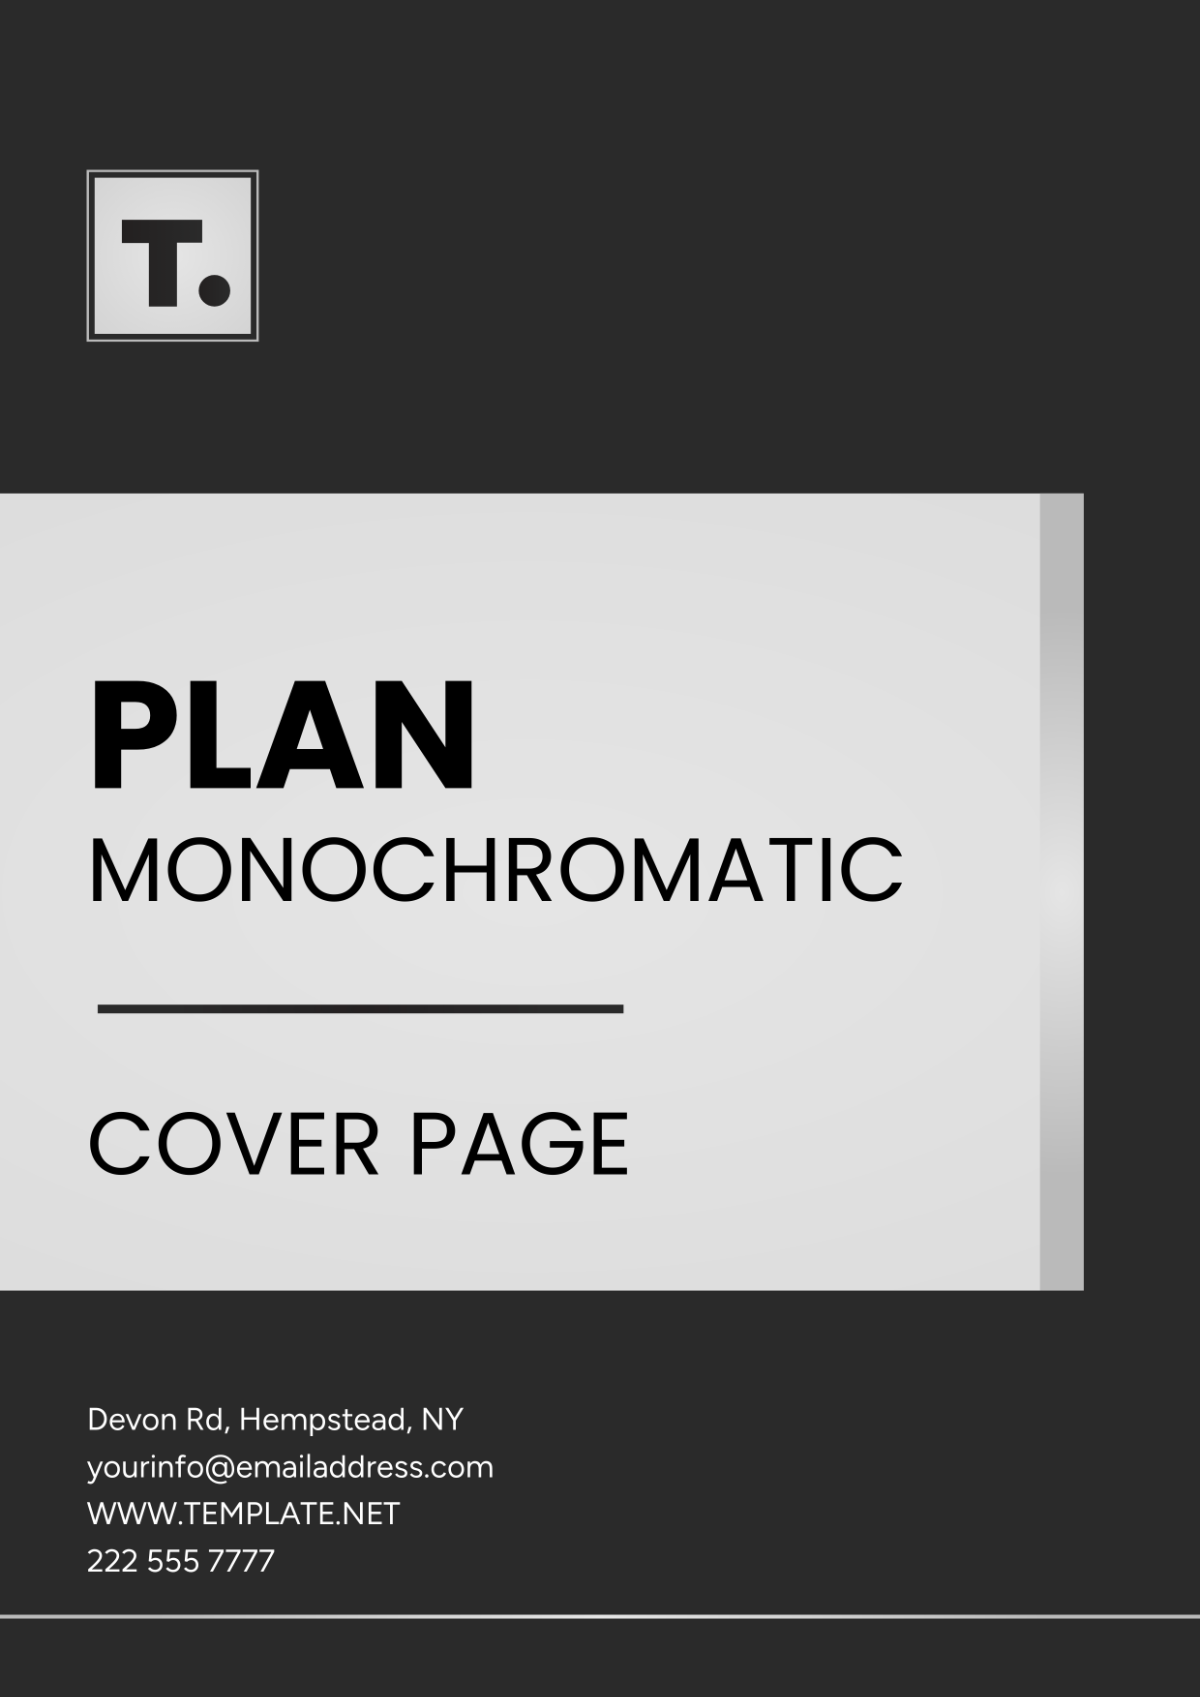 Plan Monochromatic Cover Page